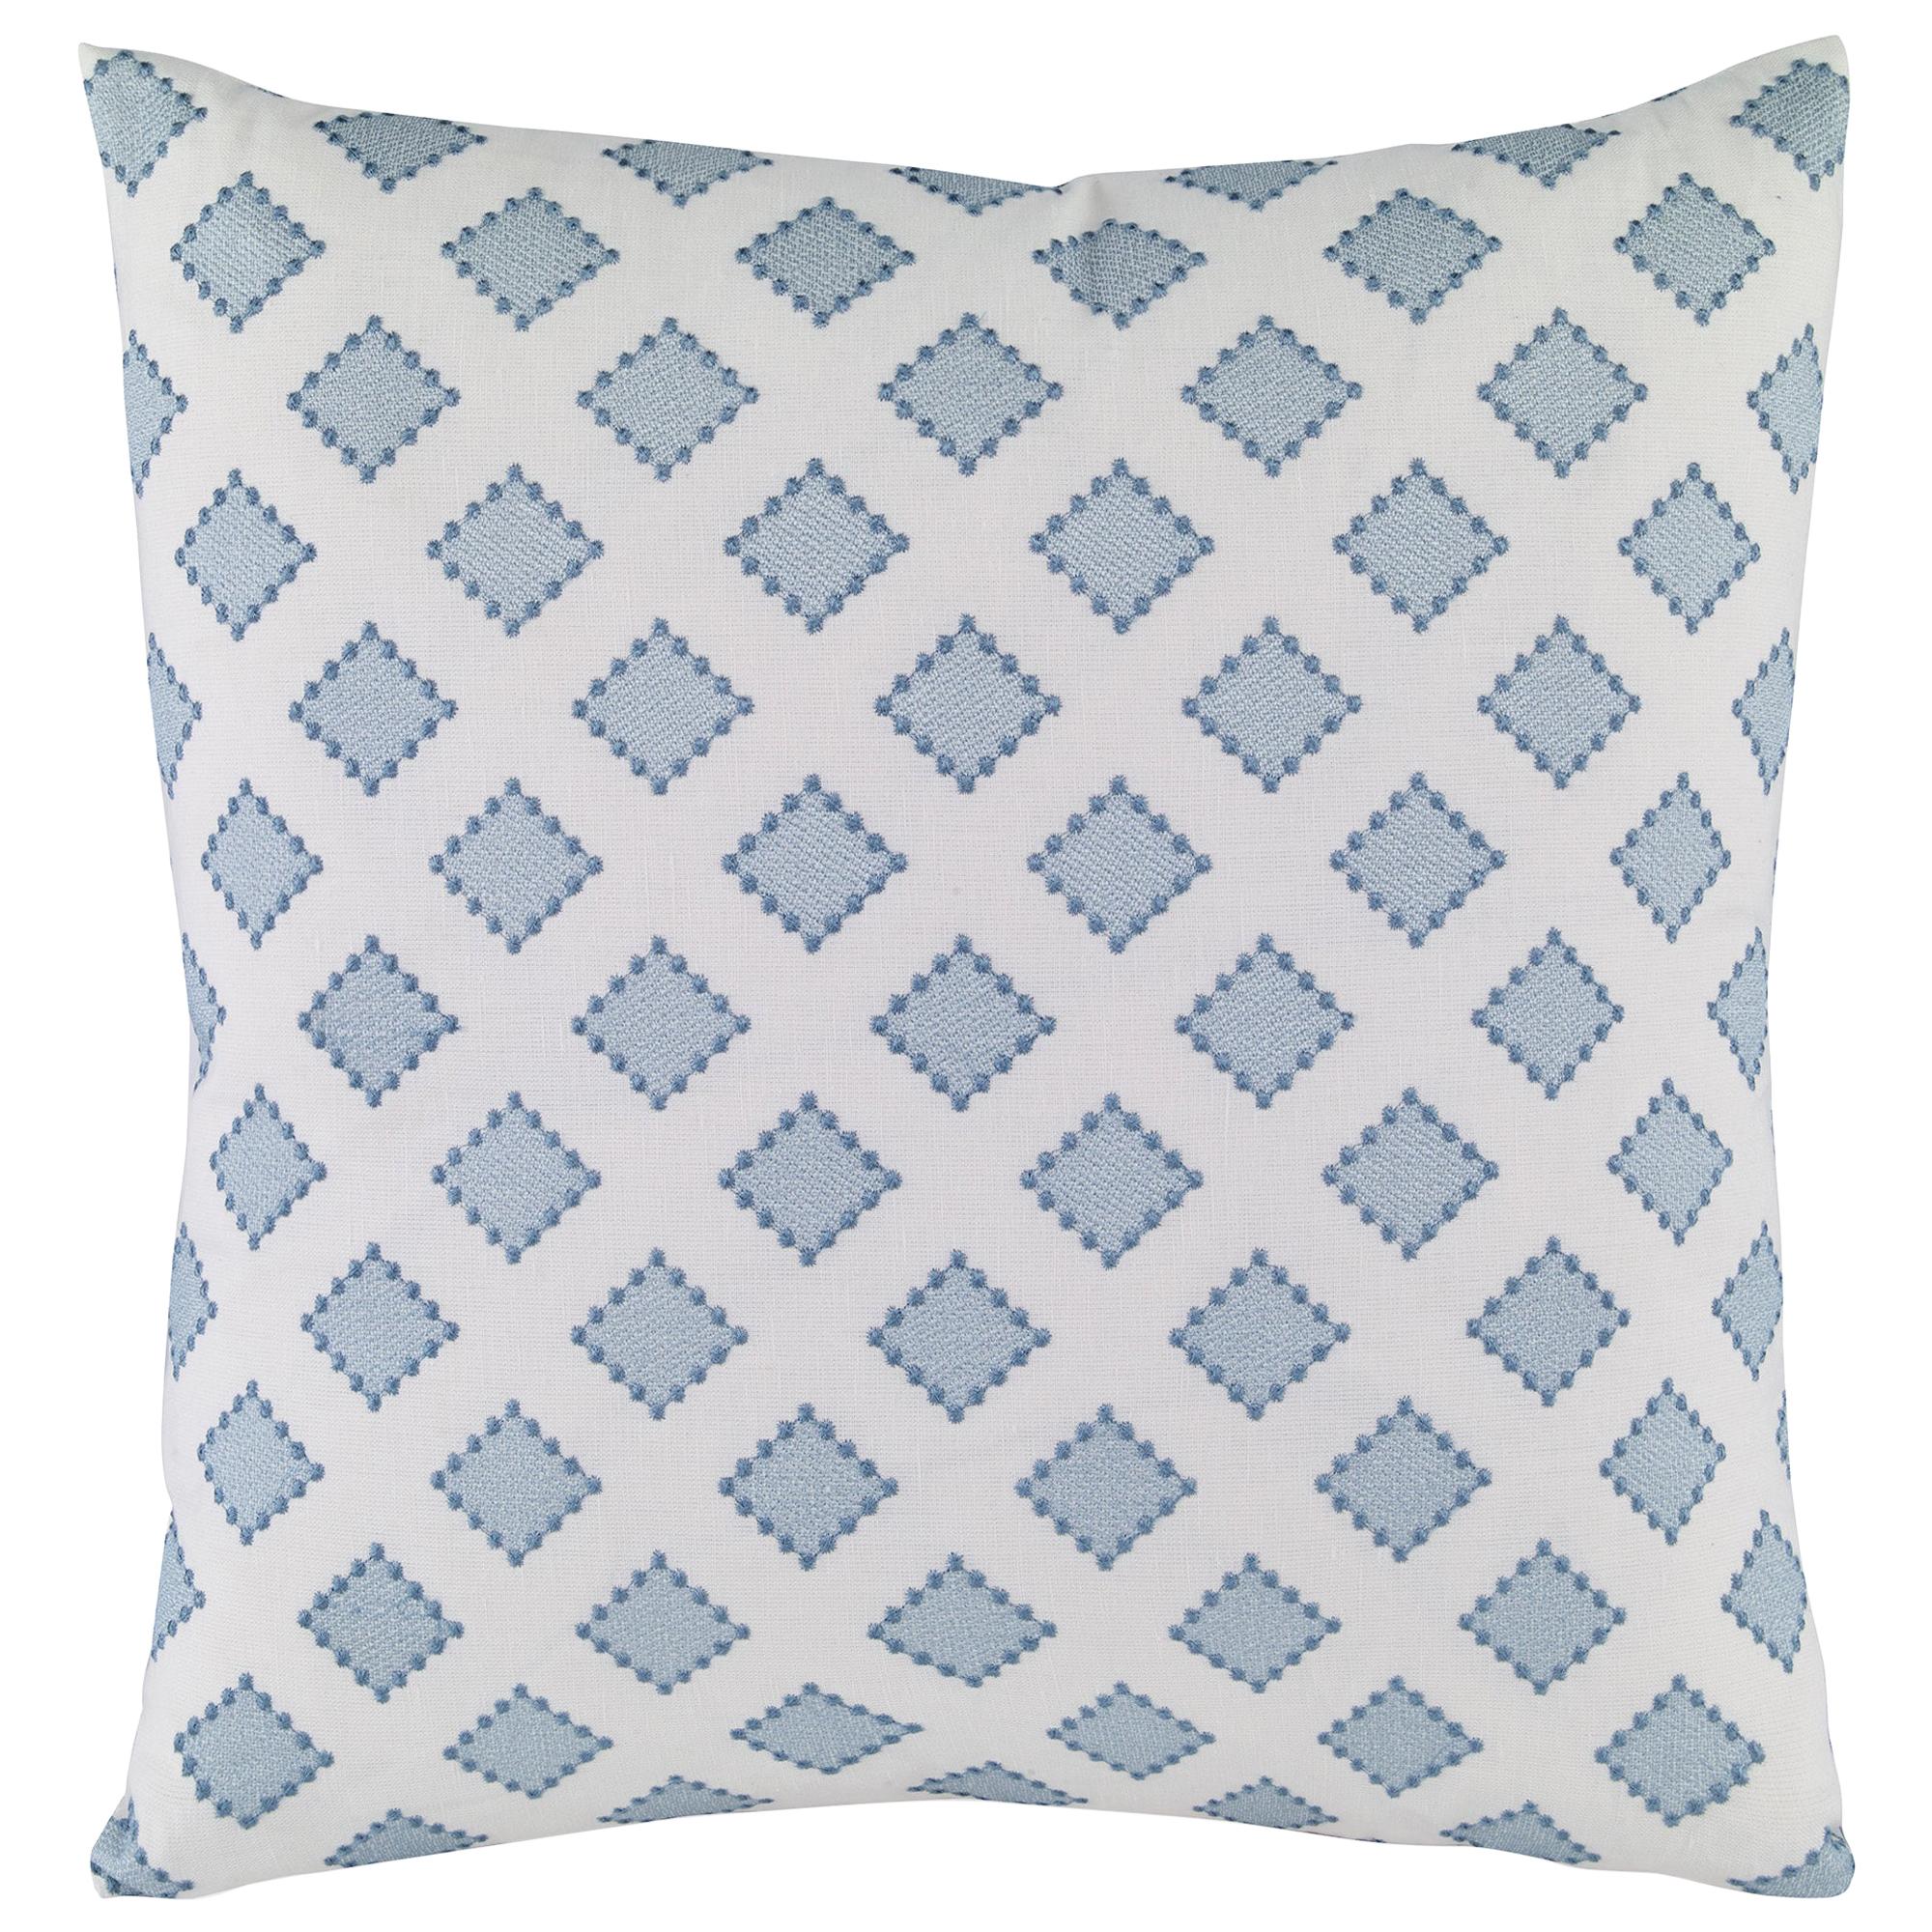 Diamondots Pillow in Turquoise by Curatedkravet